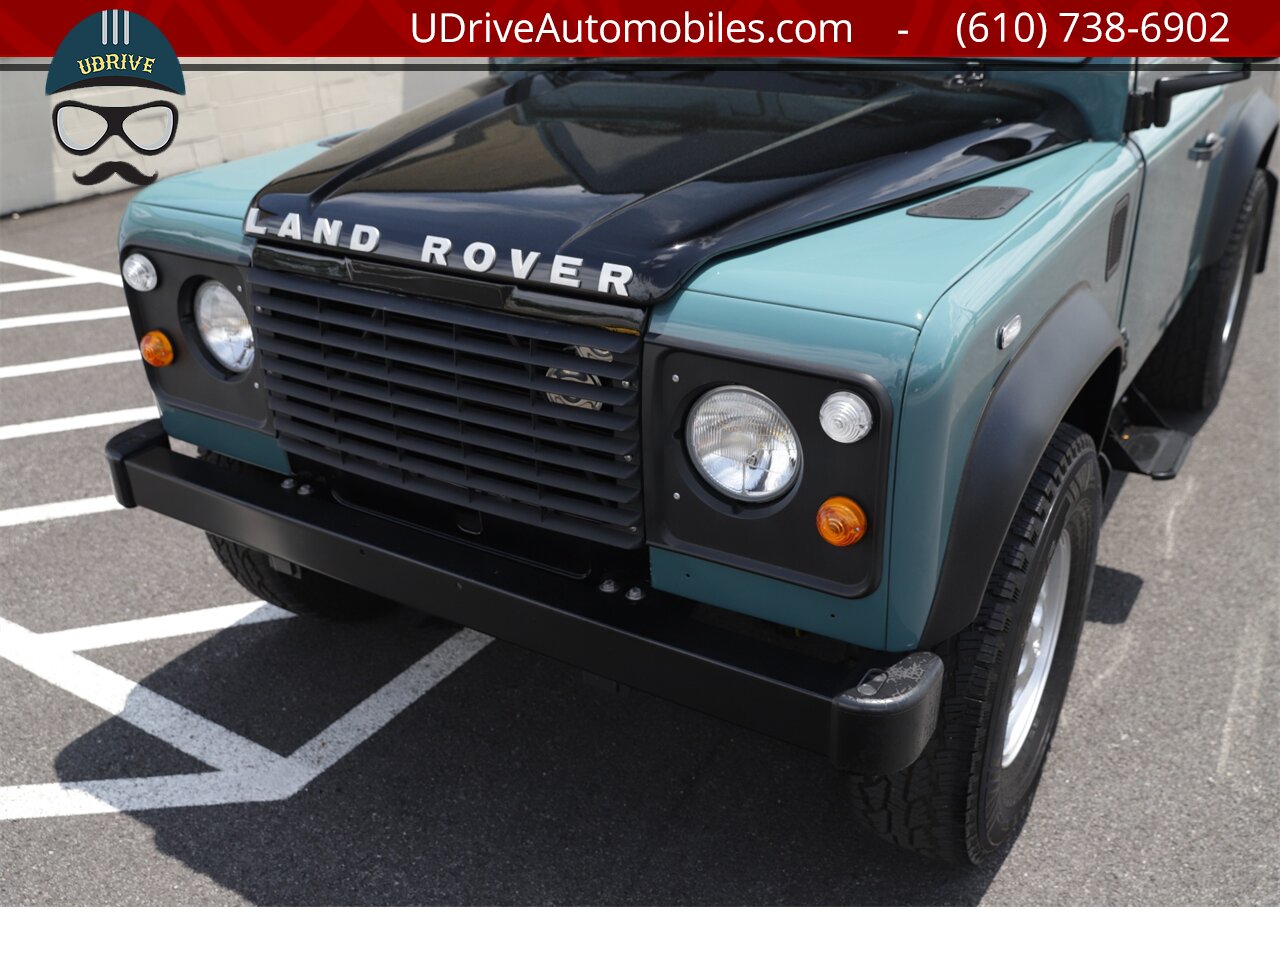 1986 Land Rover Defender 90 D90 4.0L V8 5 Speed Manual New Interior  $25k Recent Engine Build - Photo 11 - West Chester, PA 19382